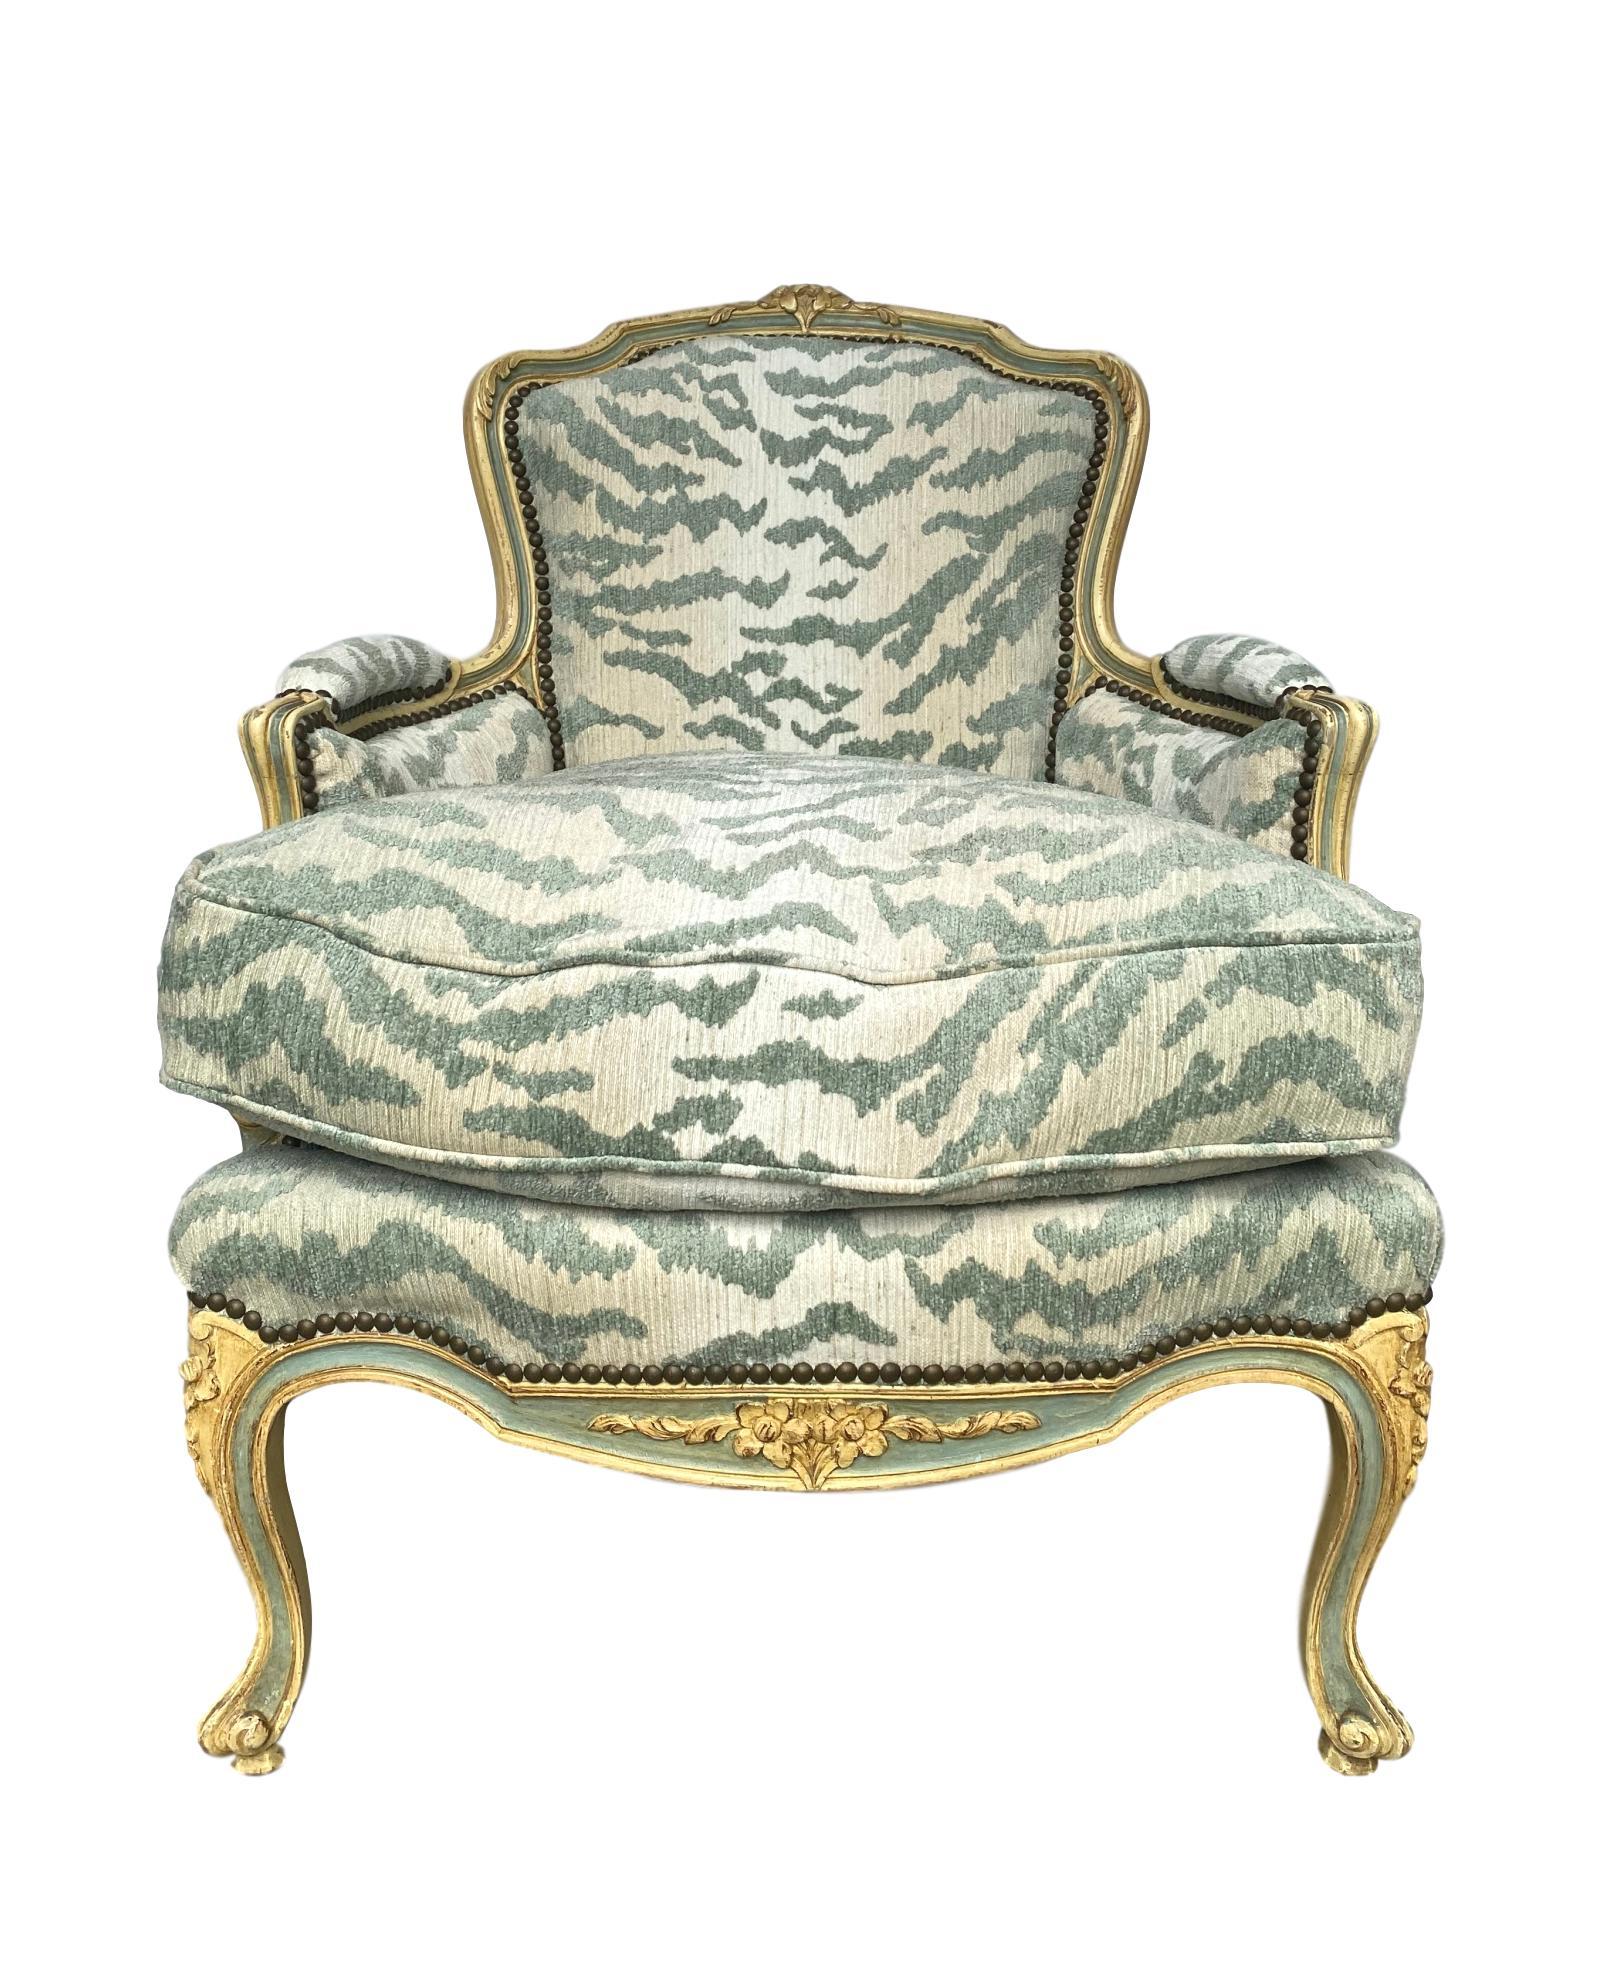 French Bergère chair carved and painted in ivory and celadon blue, circa 1940. Newly upholstered in luxurious AJA-celadon tiger, trimmed with individual nailheads. Perfectly flow-matched, with a sumptuous cushion which is flow-matched on both